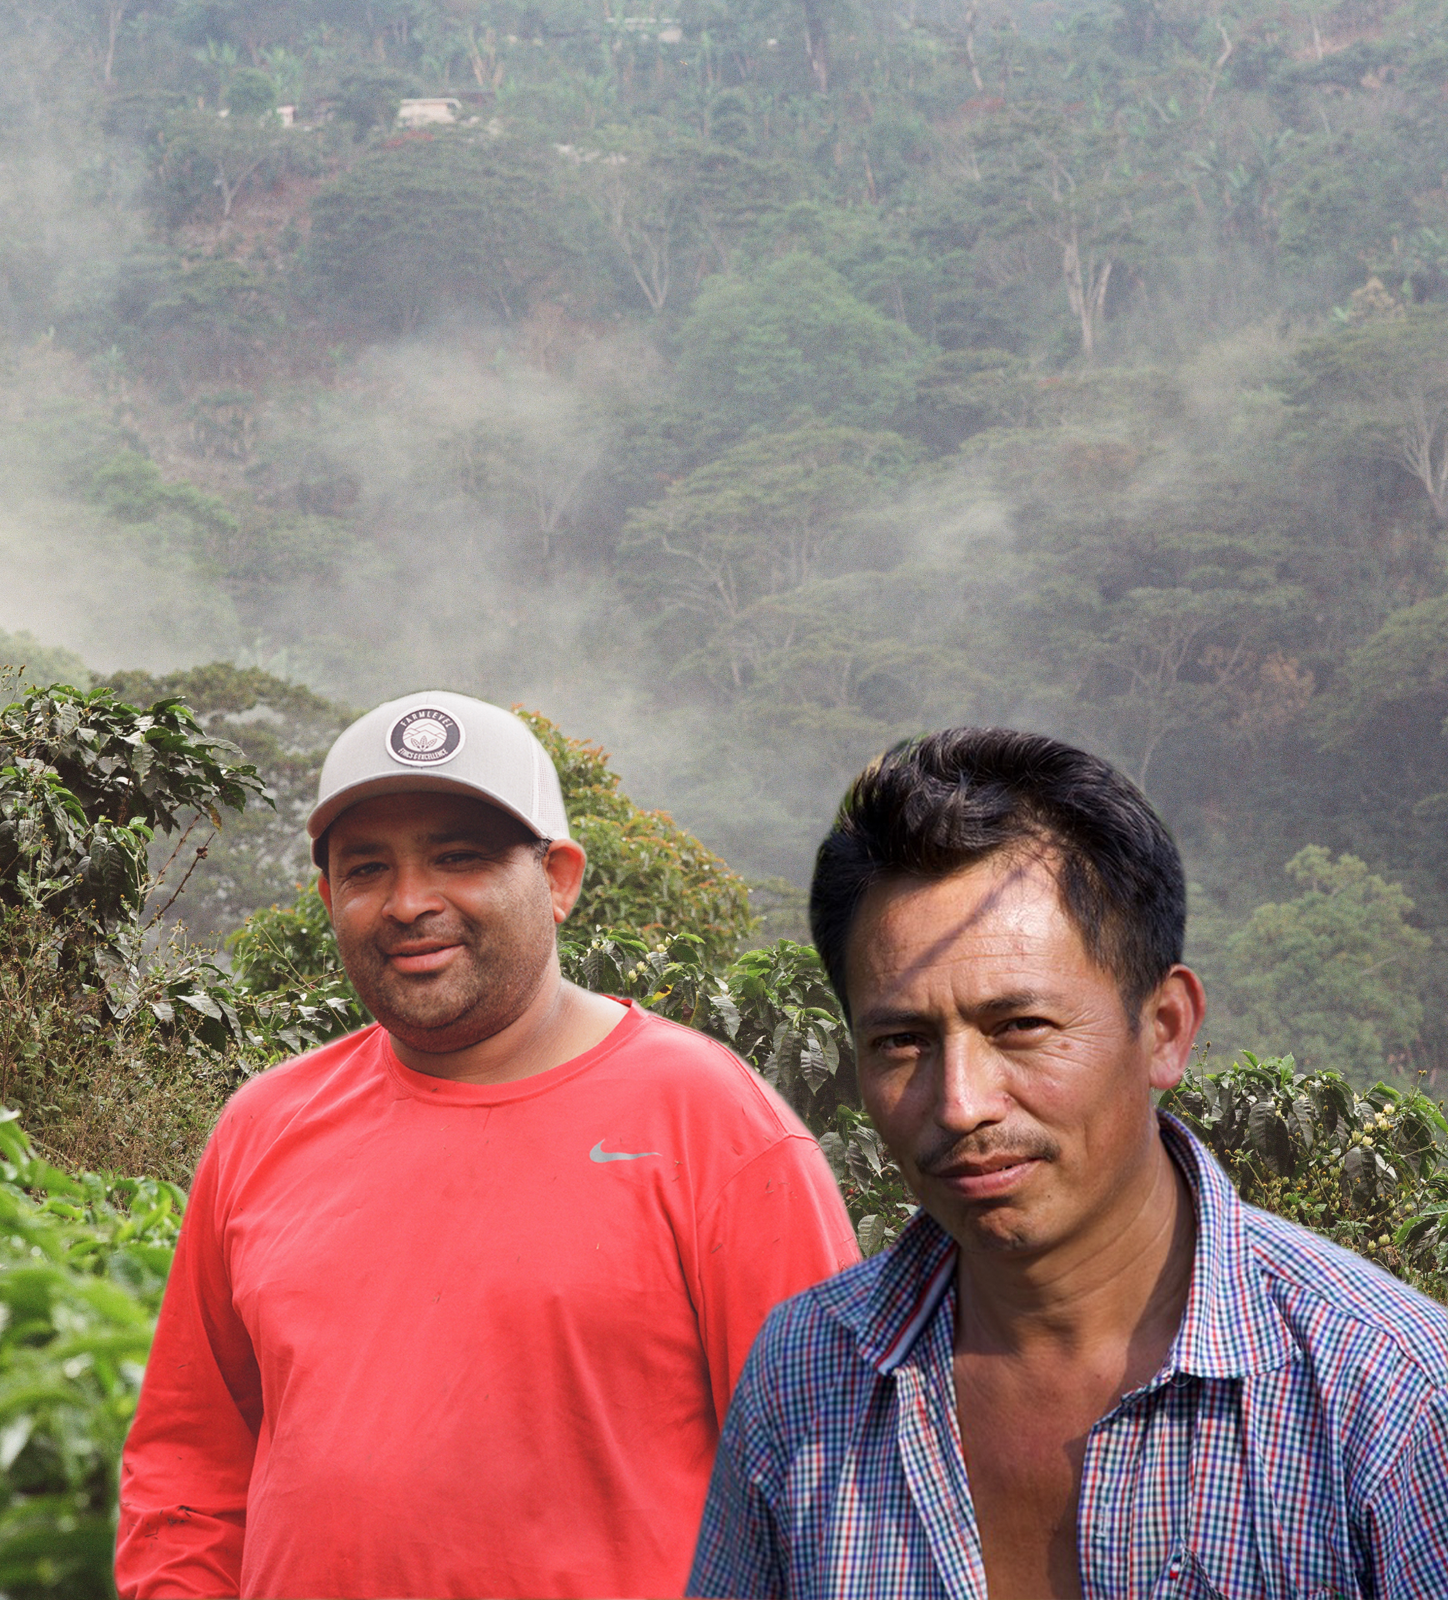 Two producers from Honduras